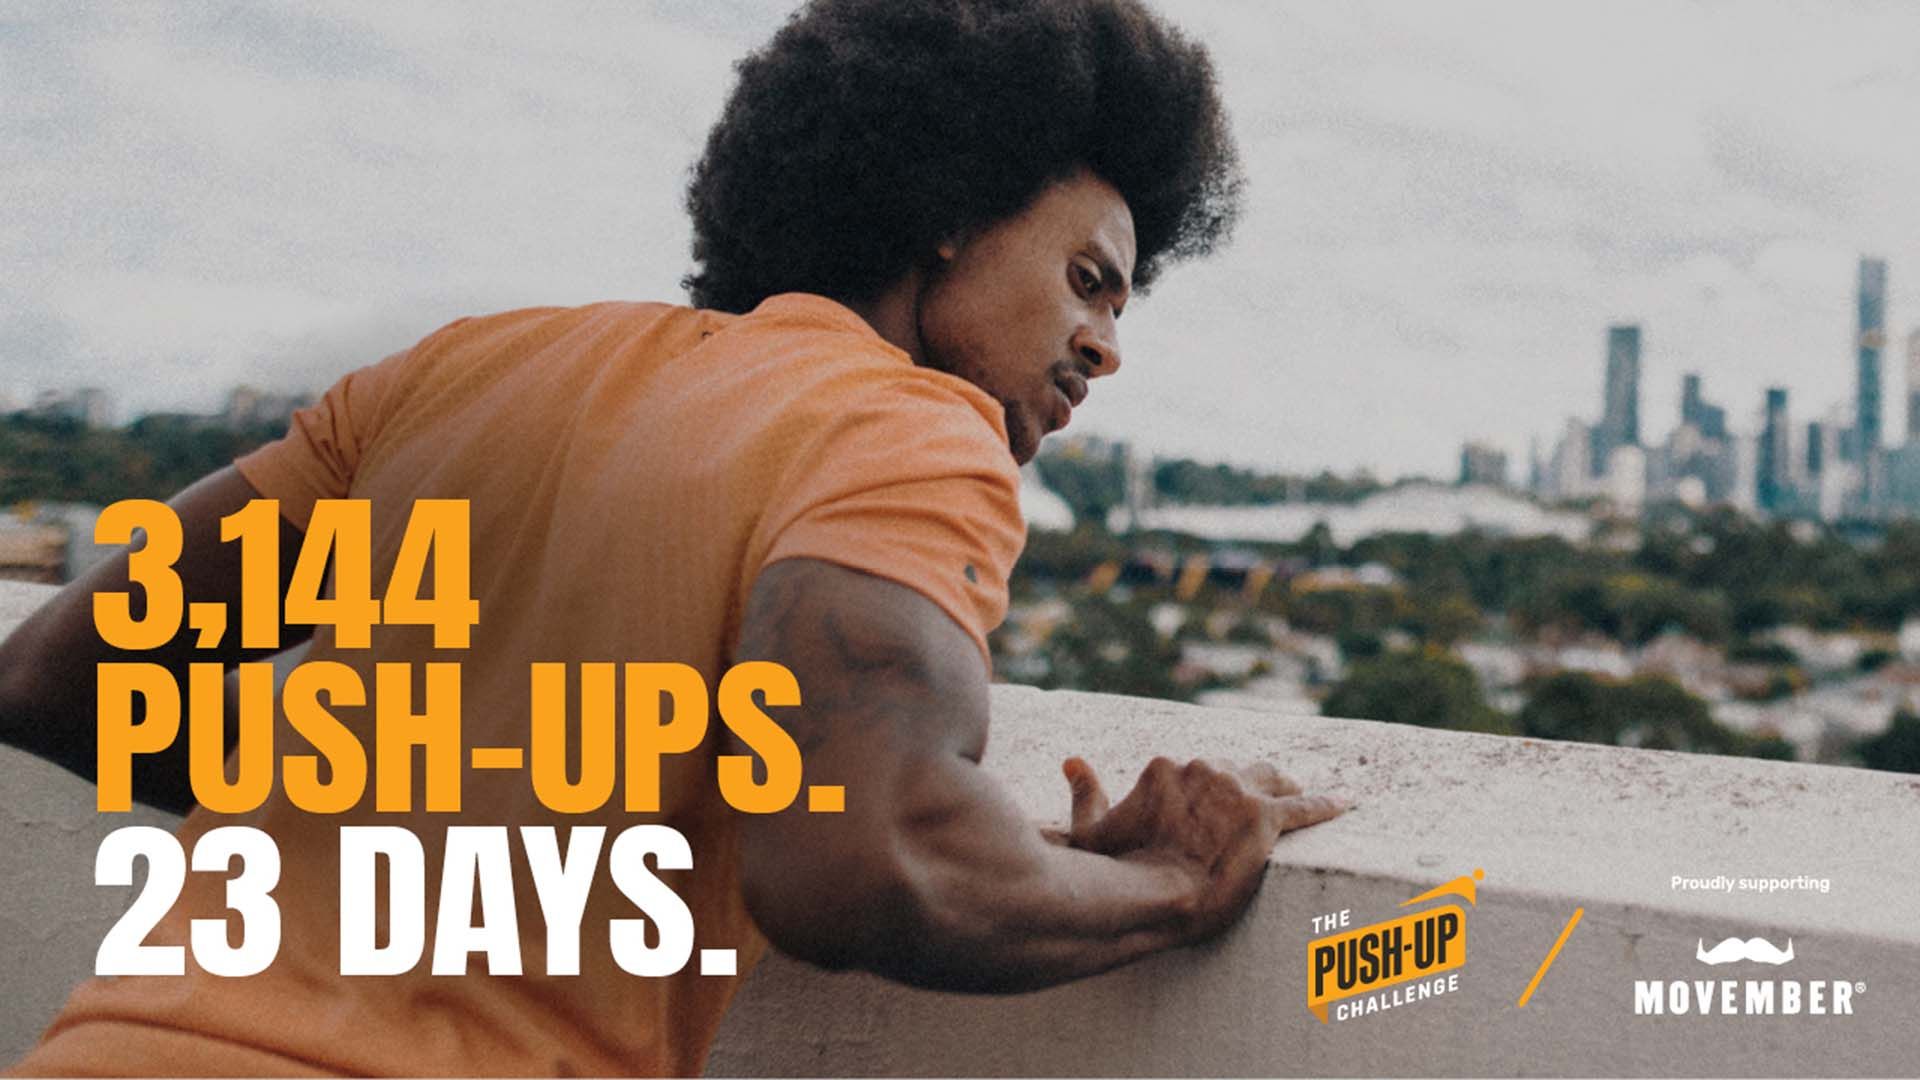 Muscular young man performing push-ups against a wall. Superimposed text says: "3,144 push-ups. 23 days."